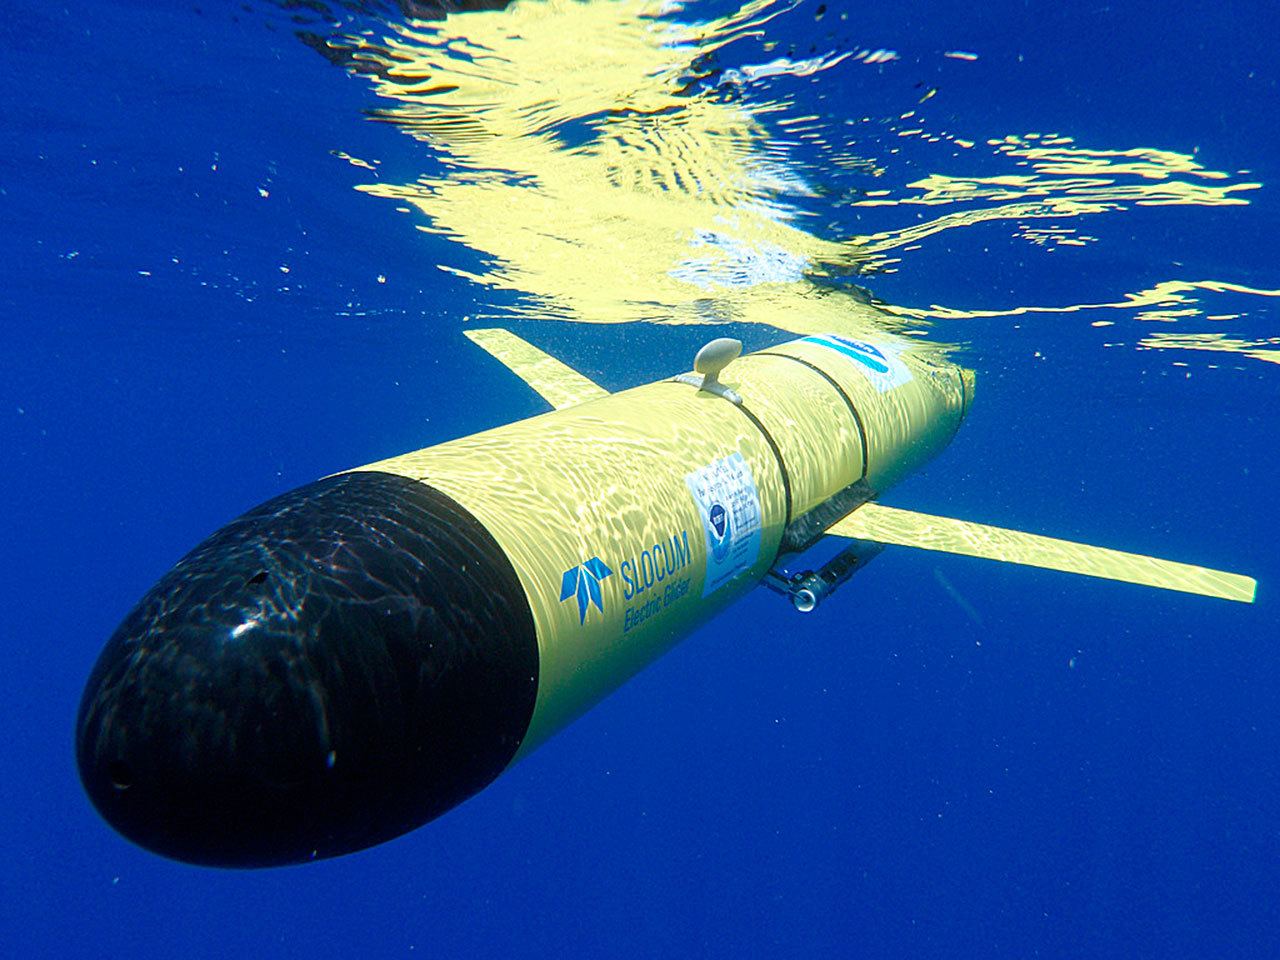 The U.S. Navy uses underwater drones to help assess water conditions. (Noaa.gov)